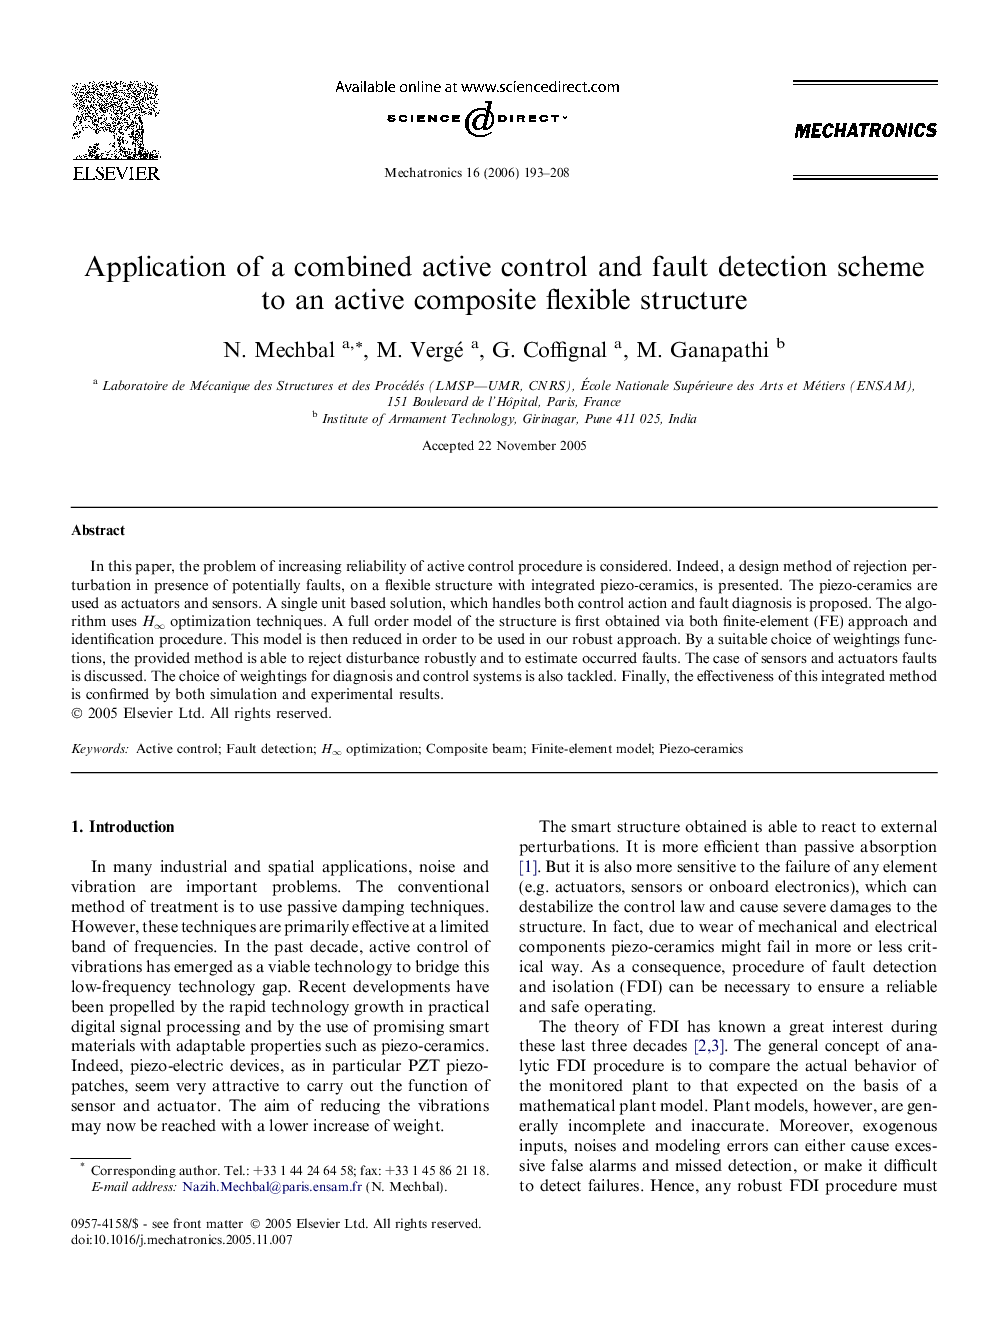 Application of a combined active control and fault detection scheme to an active composite flexible structure